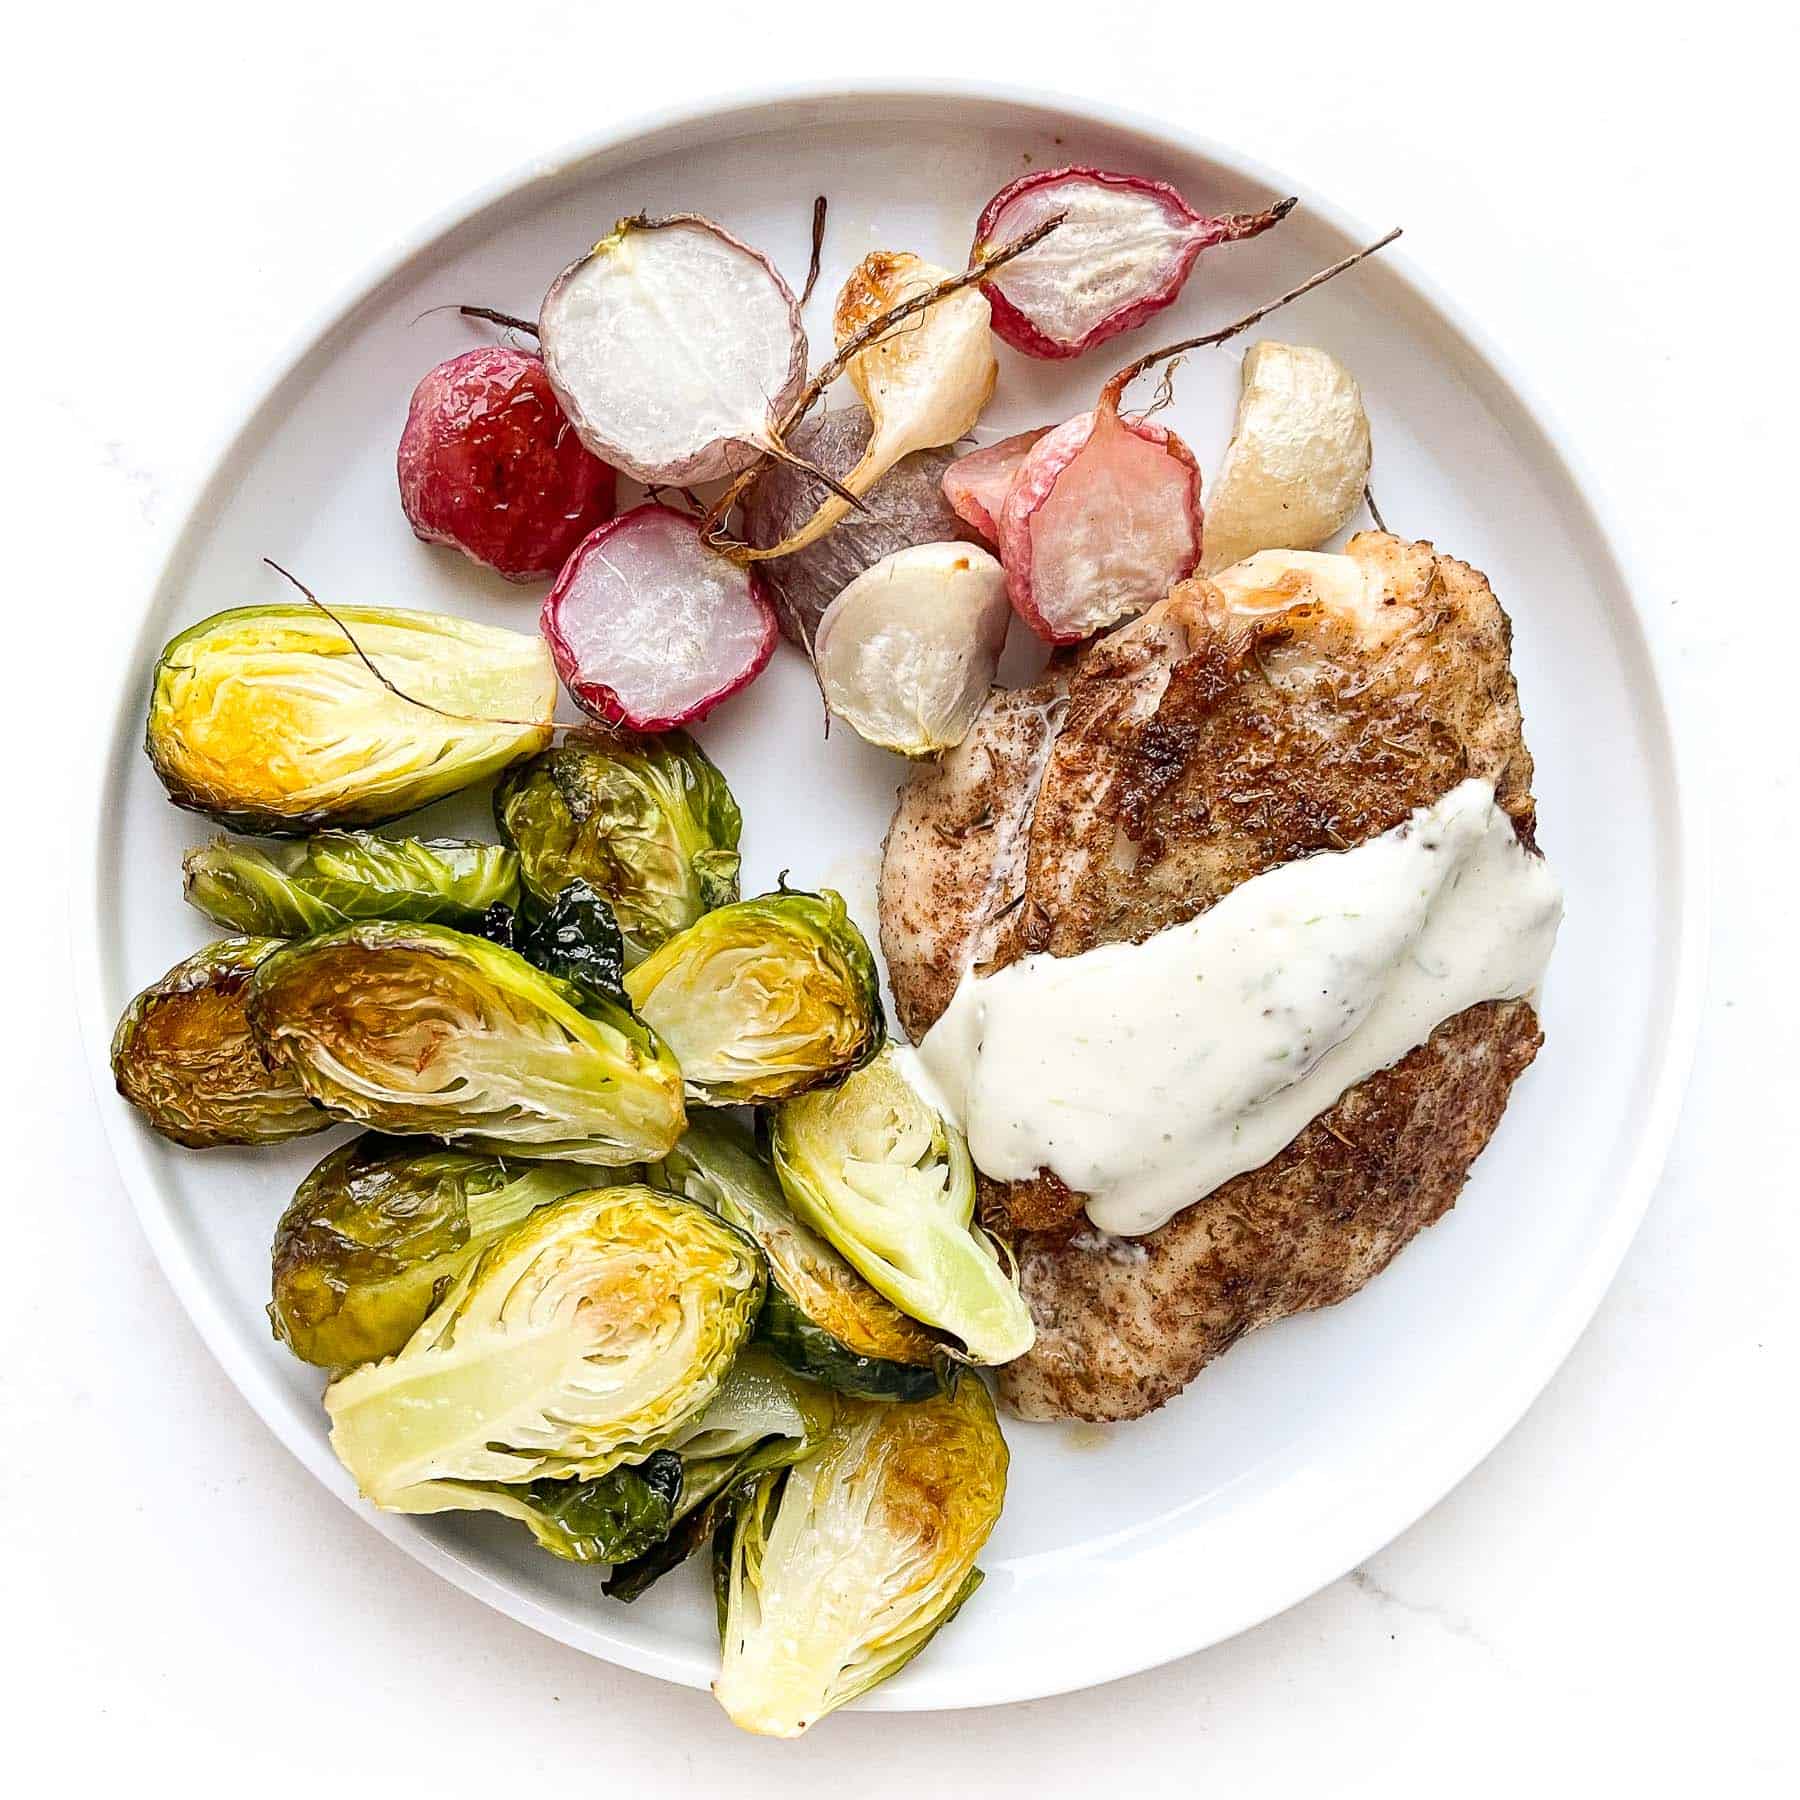 Jerk seasoned chicken breast topped with garlic lime aioli, roasted brussels sprouts + roasted radishes on a white plate and background